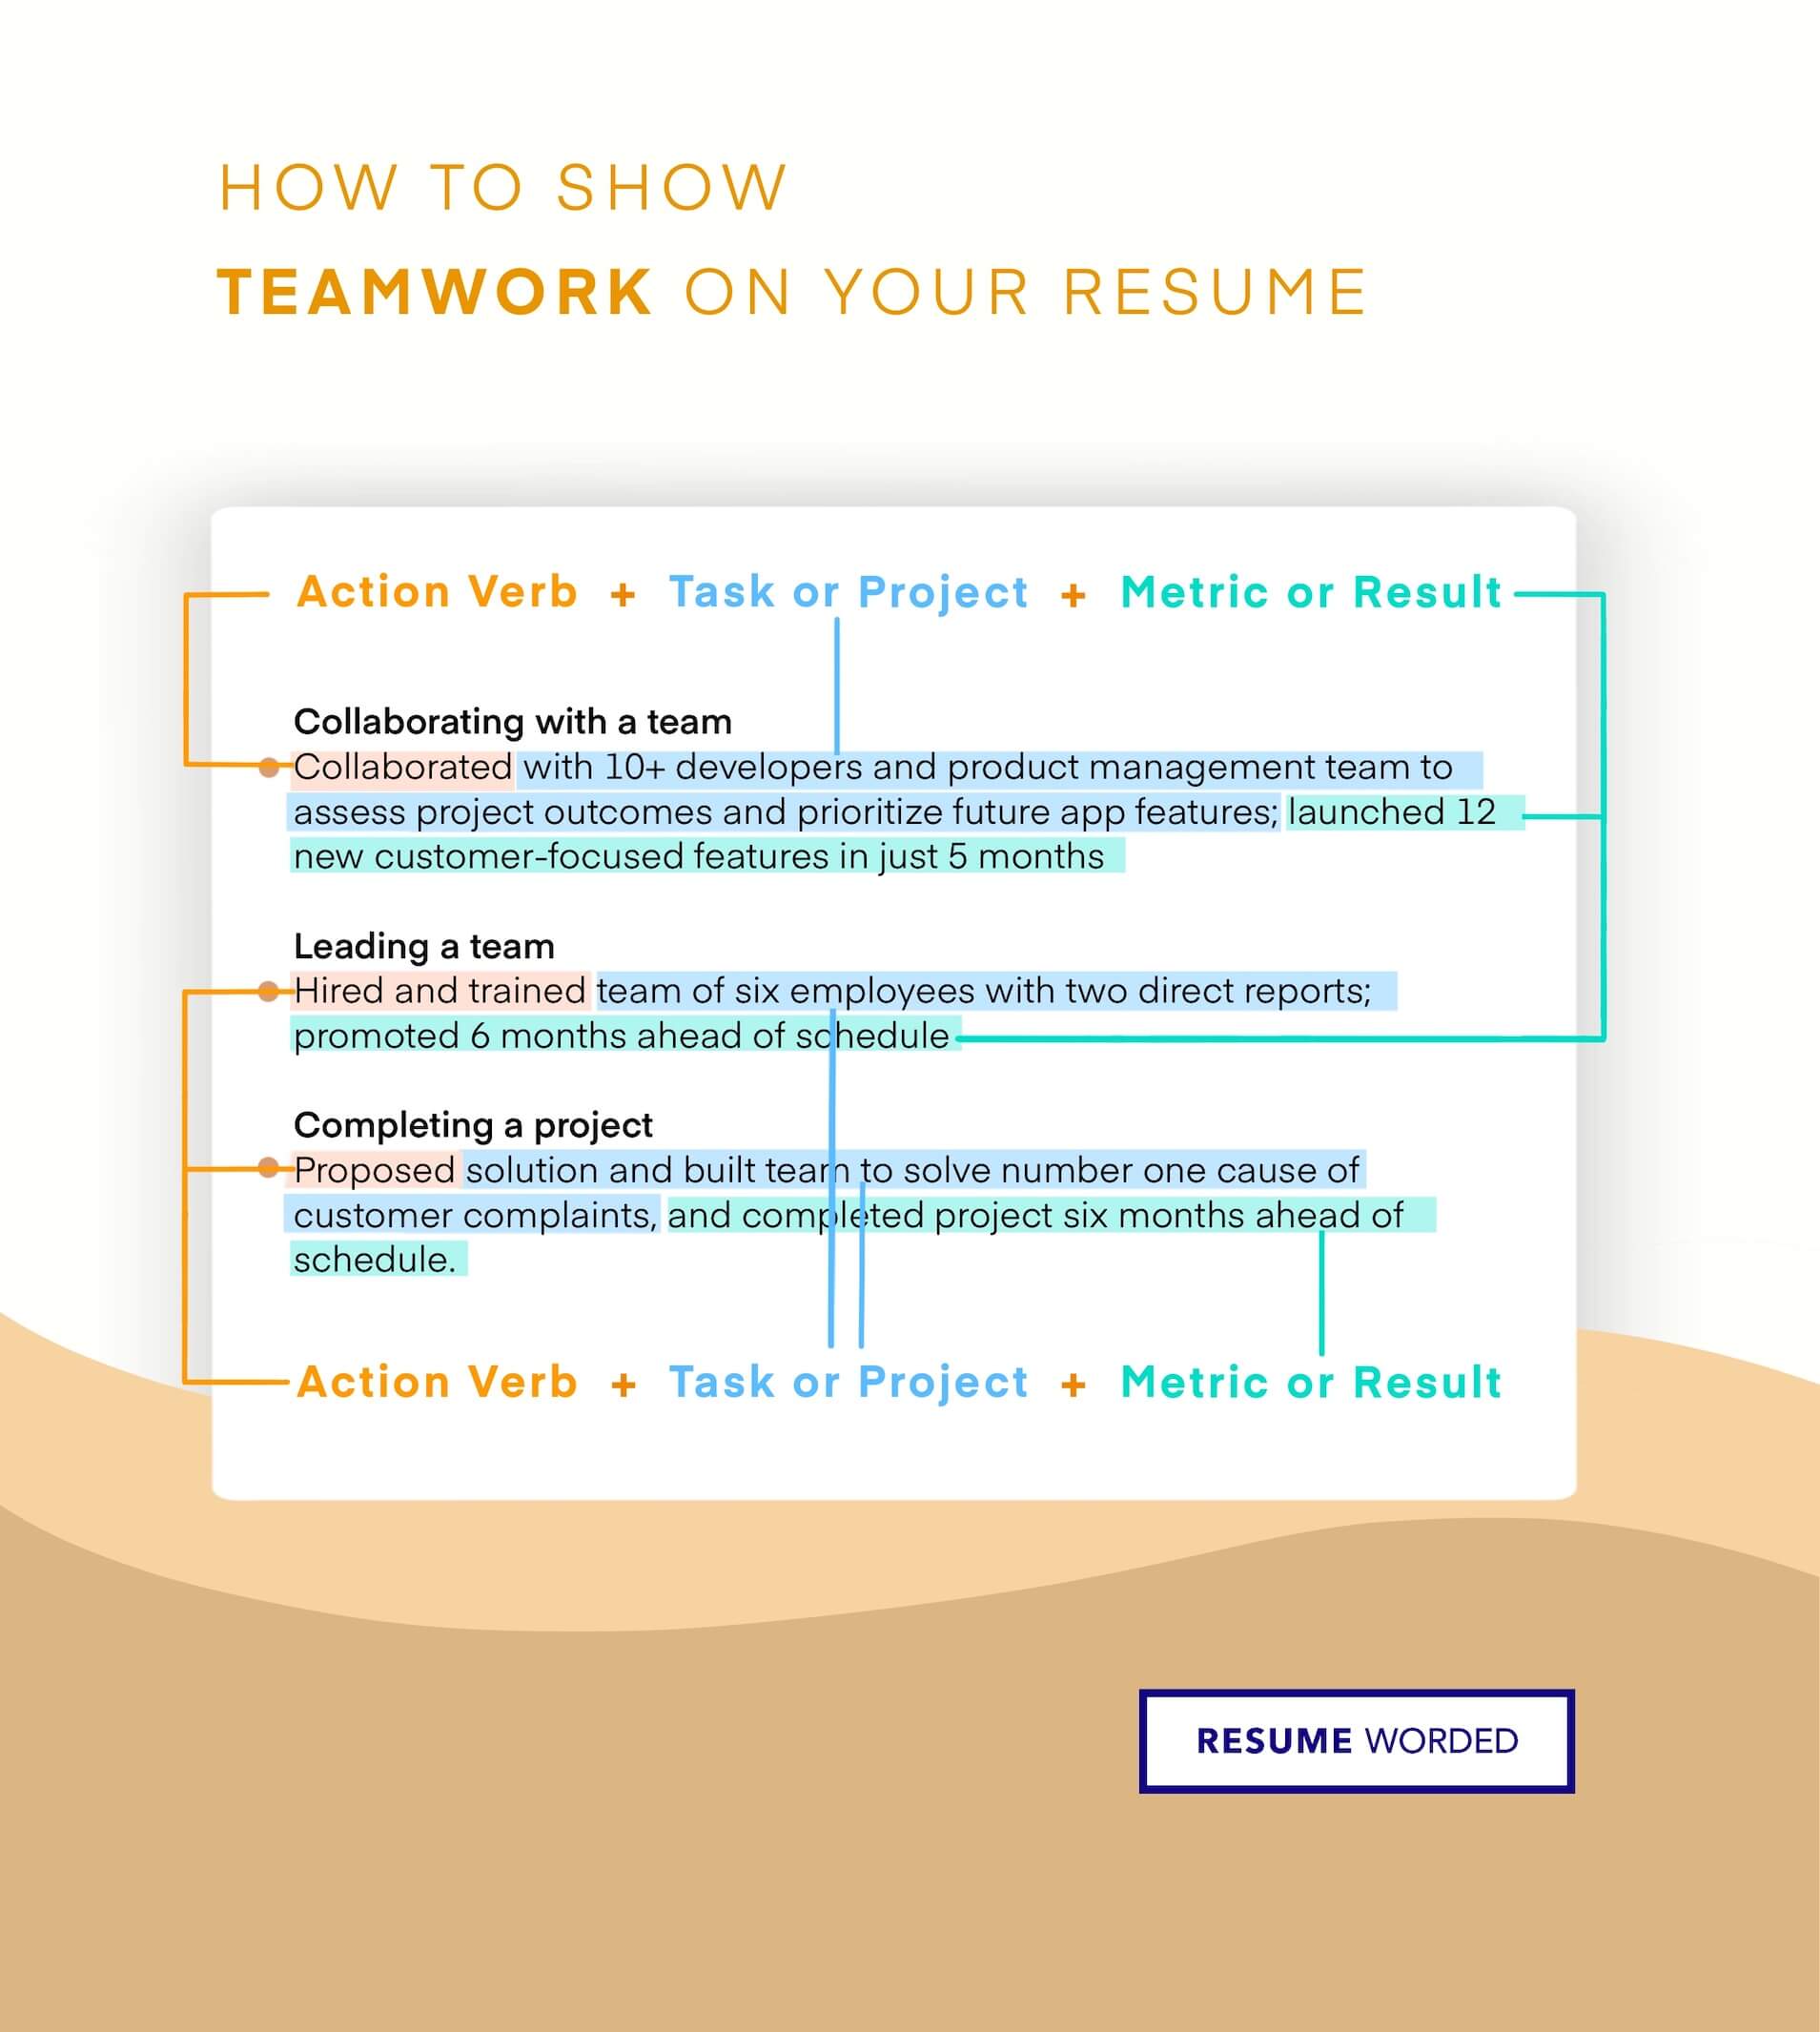 Demonstrate your ability to manage the purchasing team. - Purchasing Manager Resume